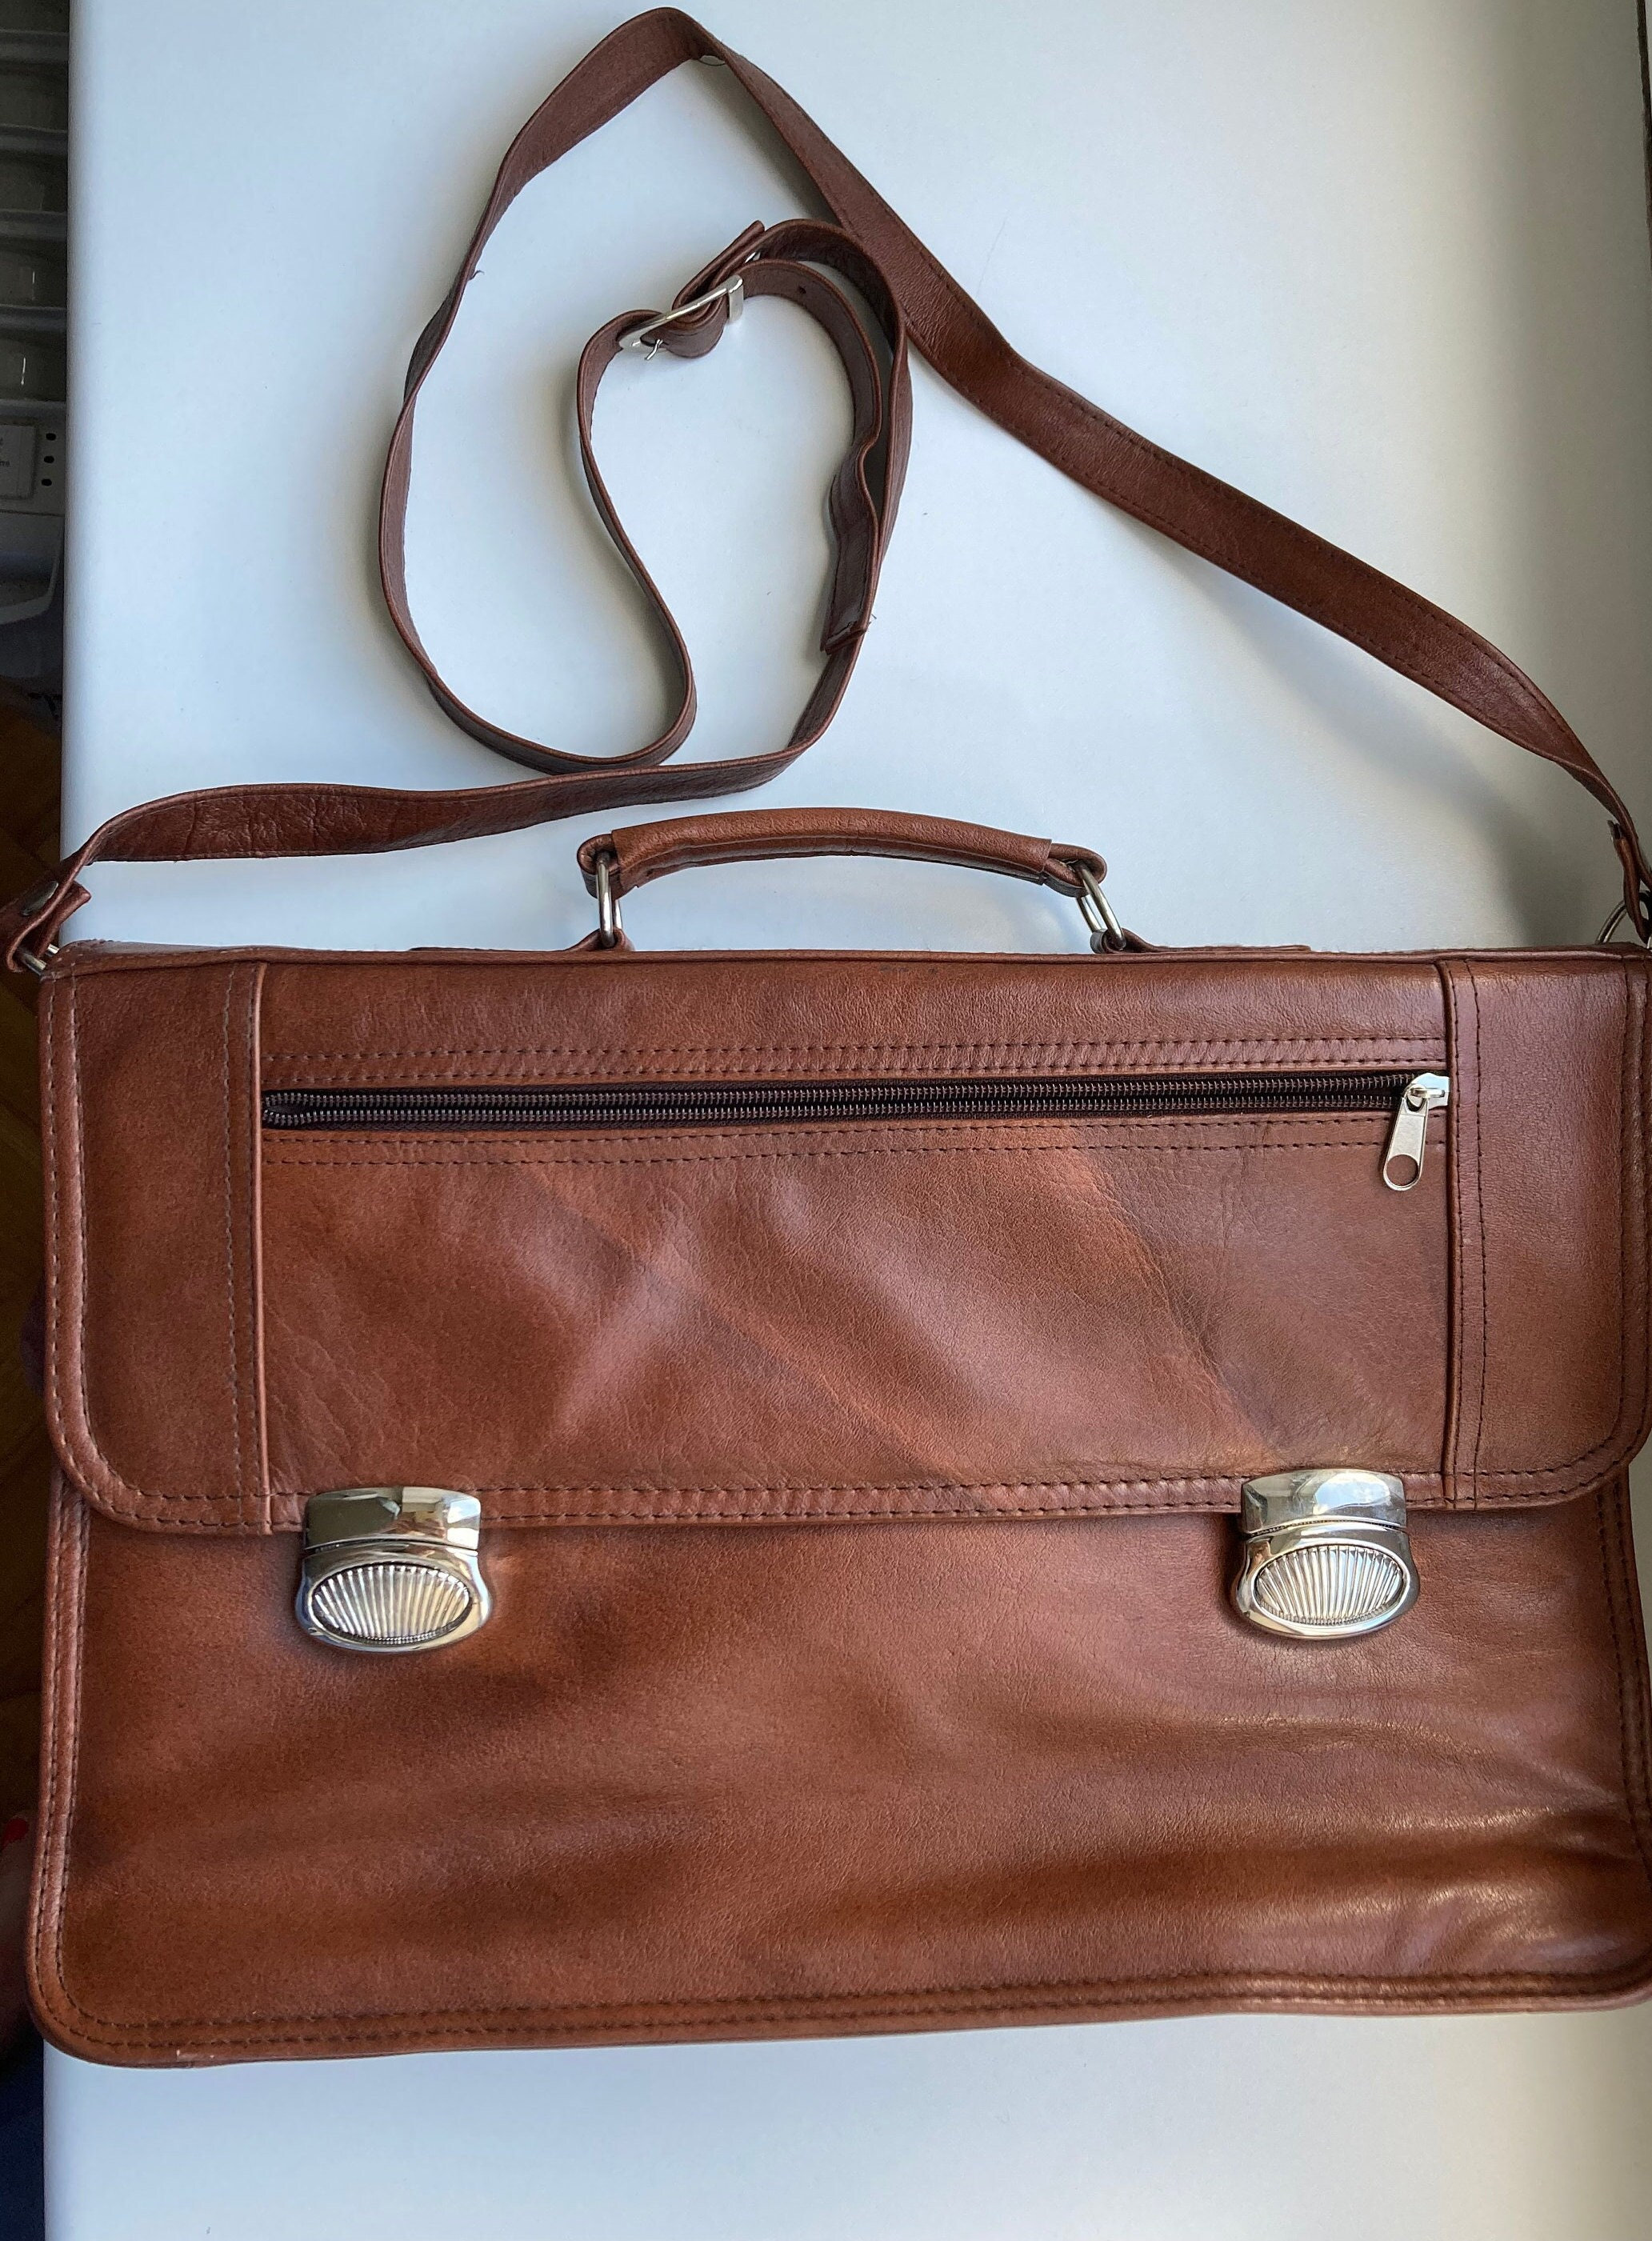 Real Leather Handbag - Brown - 2 requests